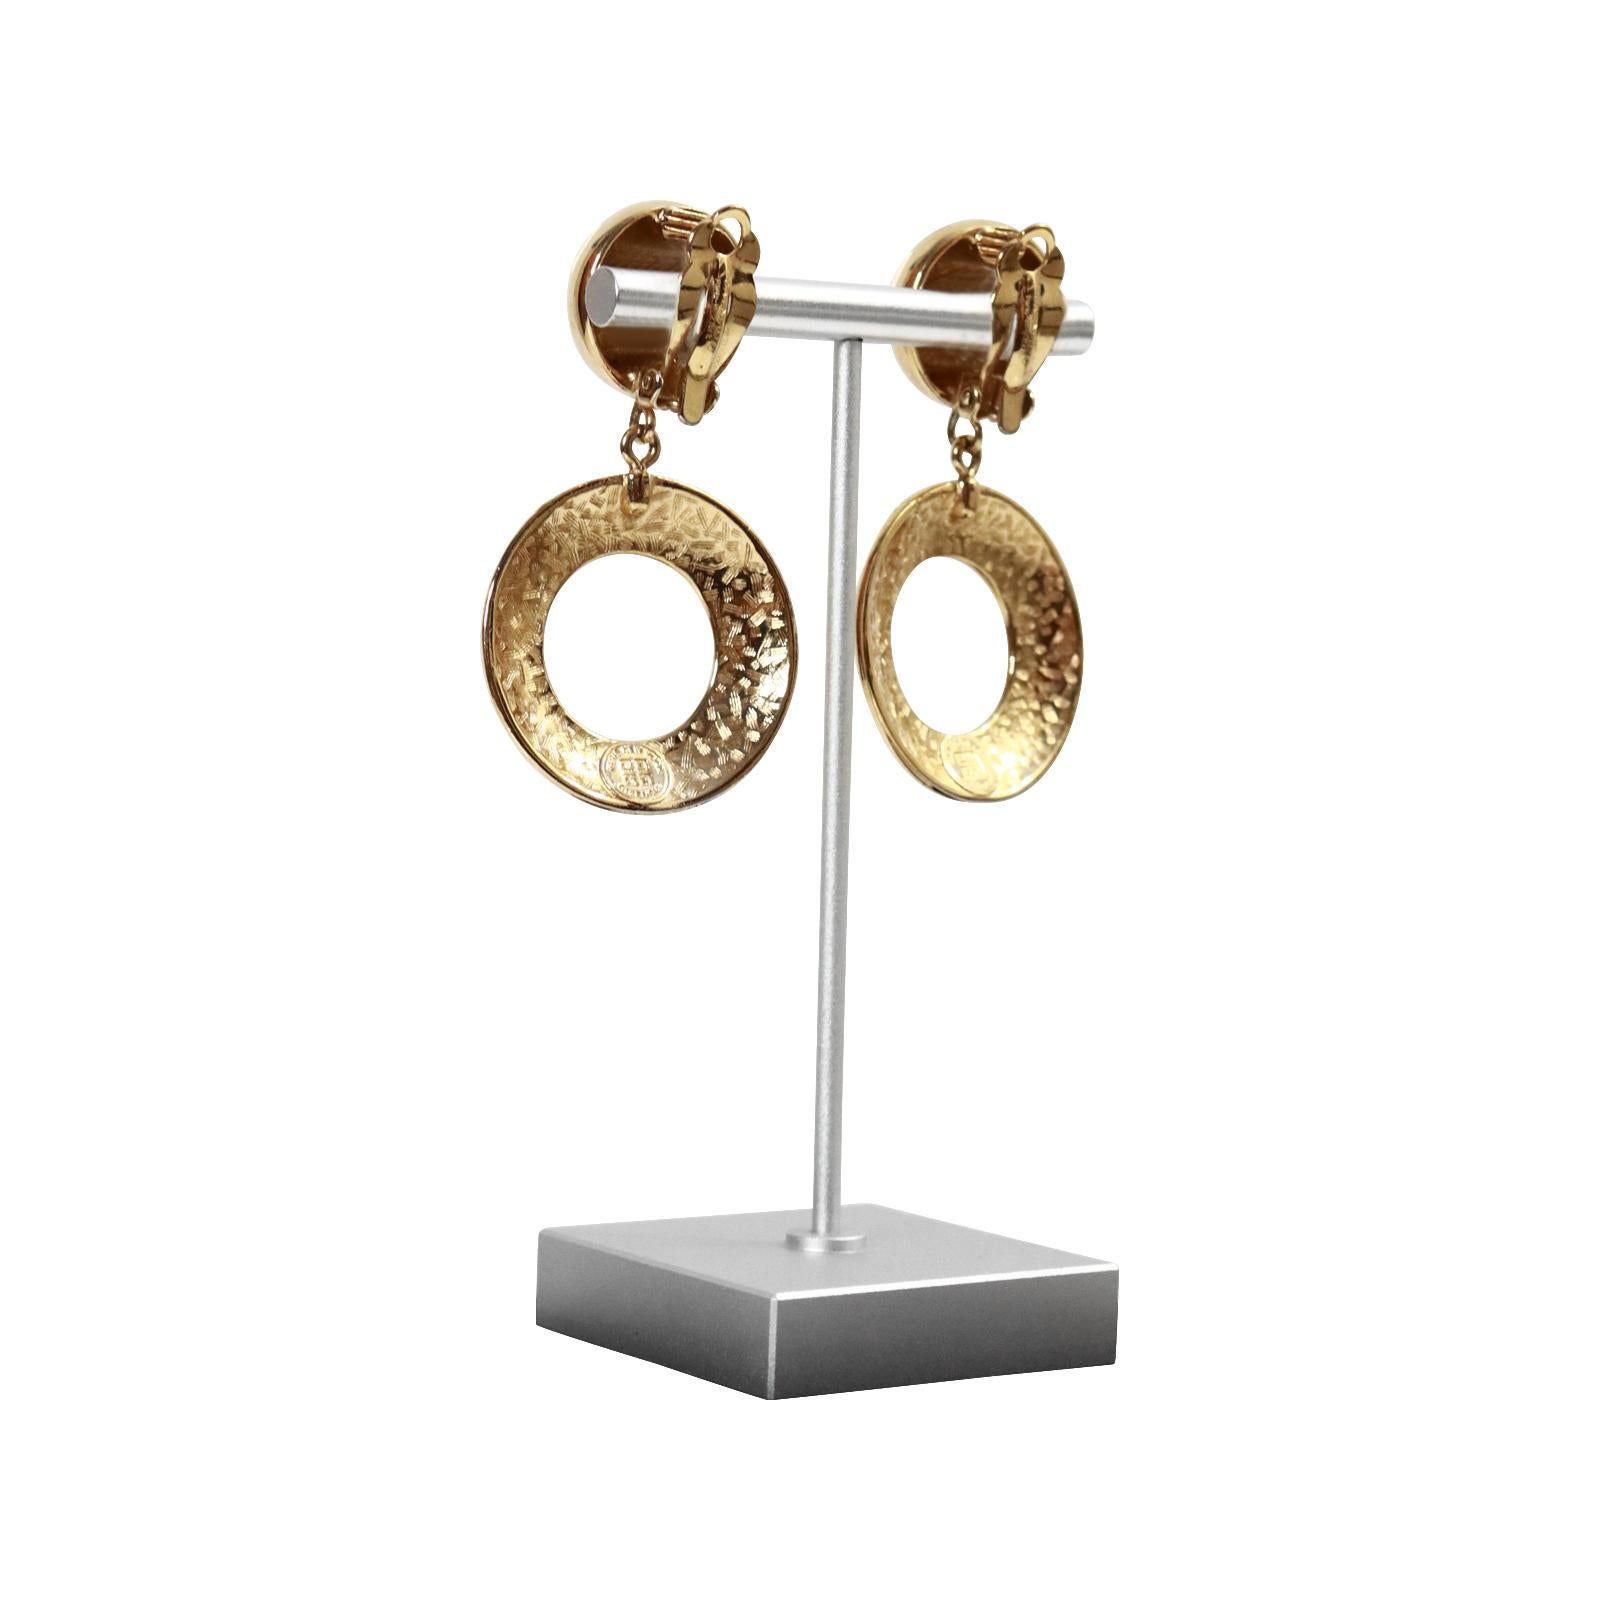 Vintage Givenchy Gold Tone Textured  Dangling Hoop Earrings Circa 1990s In Good Condition For Sale In New York, NY